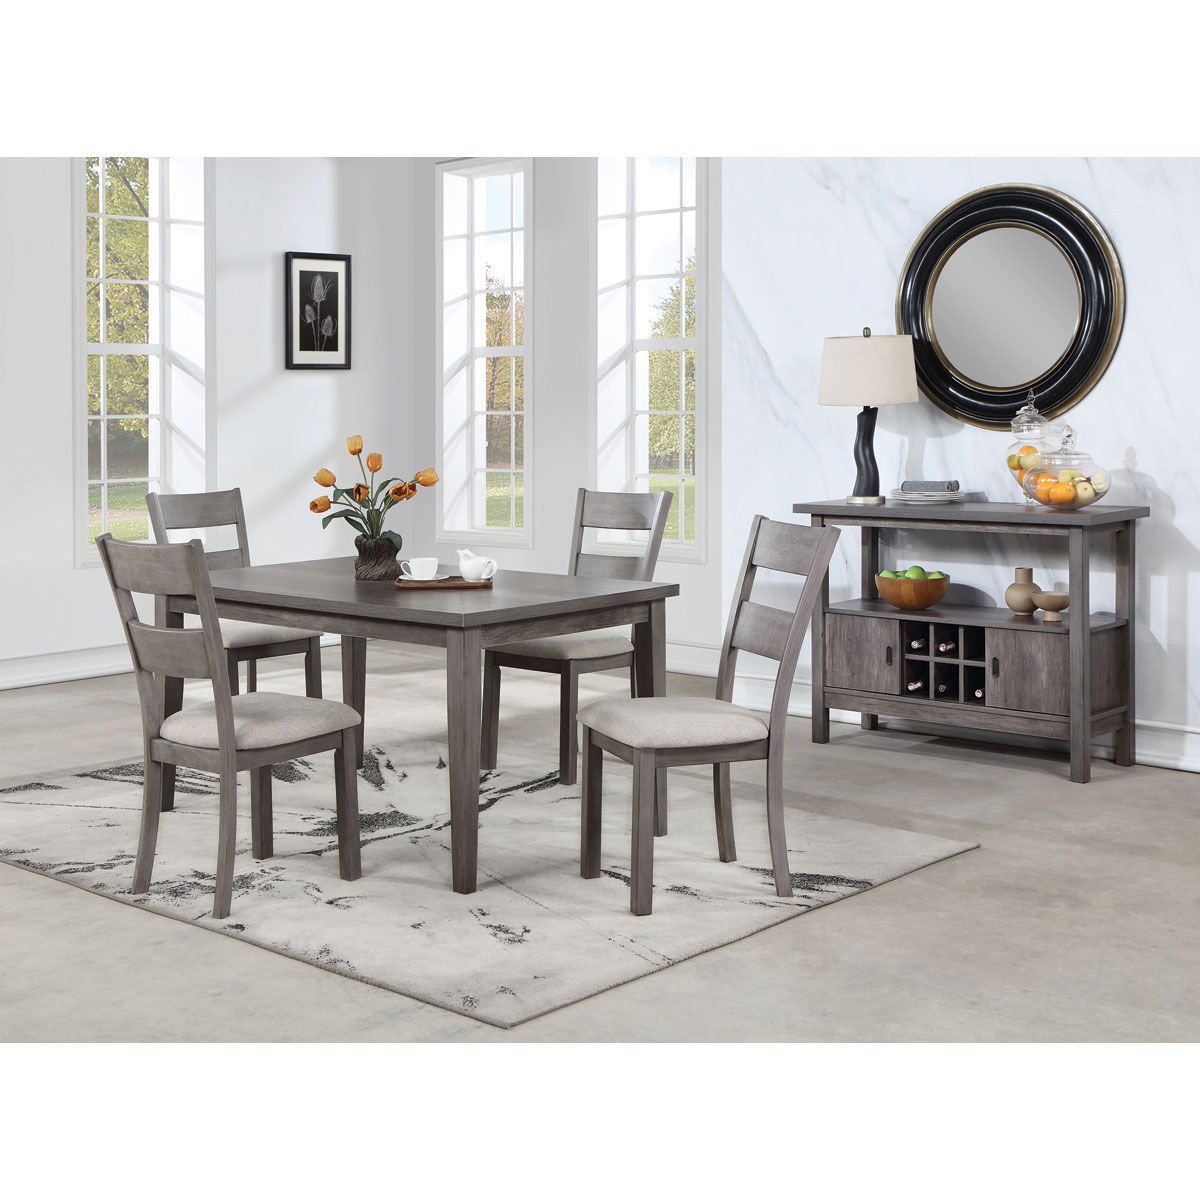 Picture of PINE HILLS 5 PC DINING SET